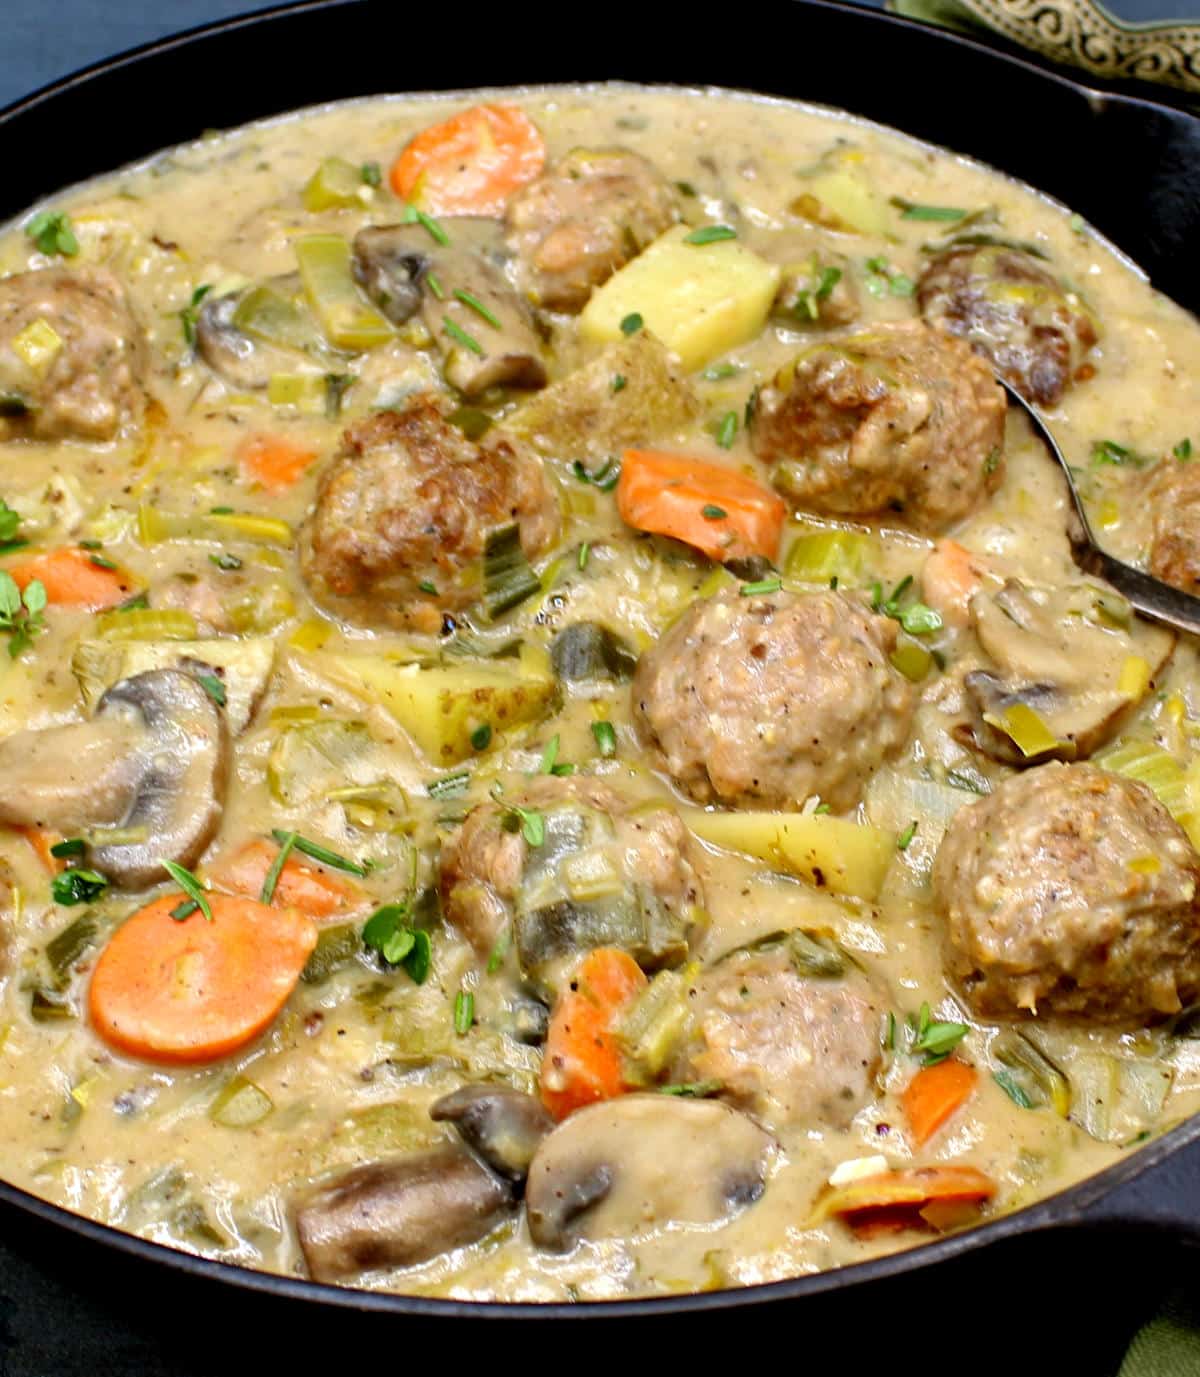 Vegan meatball fricassee with herbs, meatballs, carrots, potatoes, mushrooms and cajun spices.